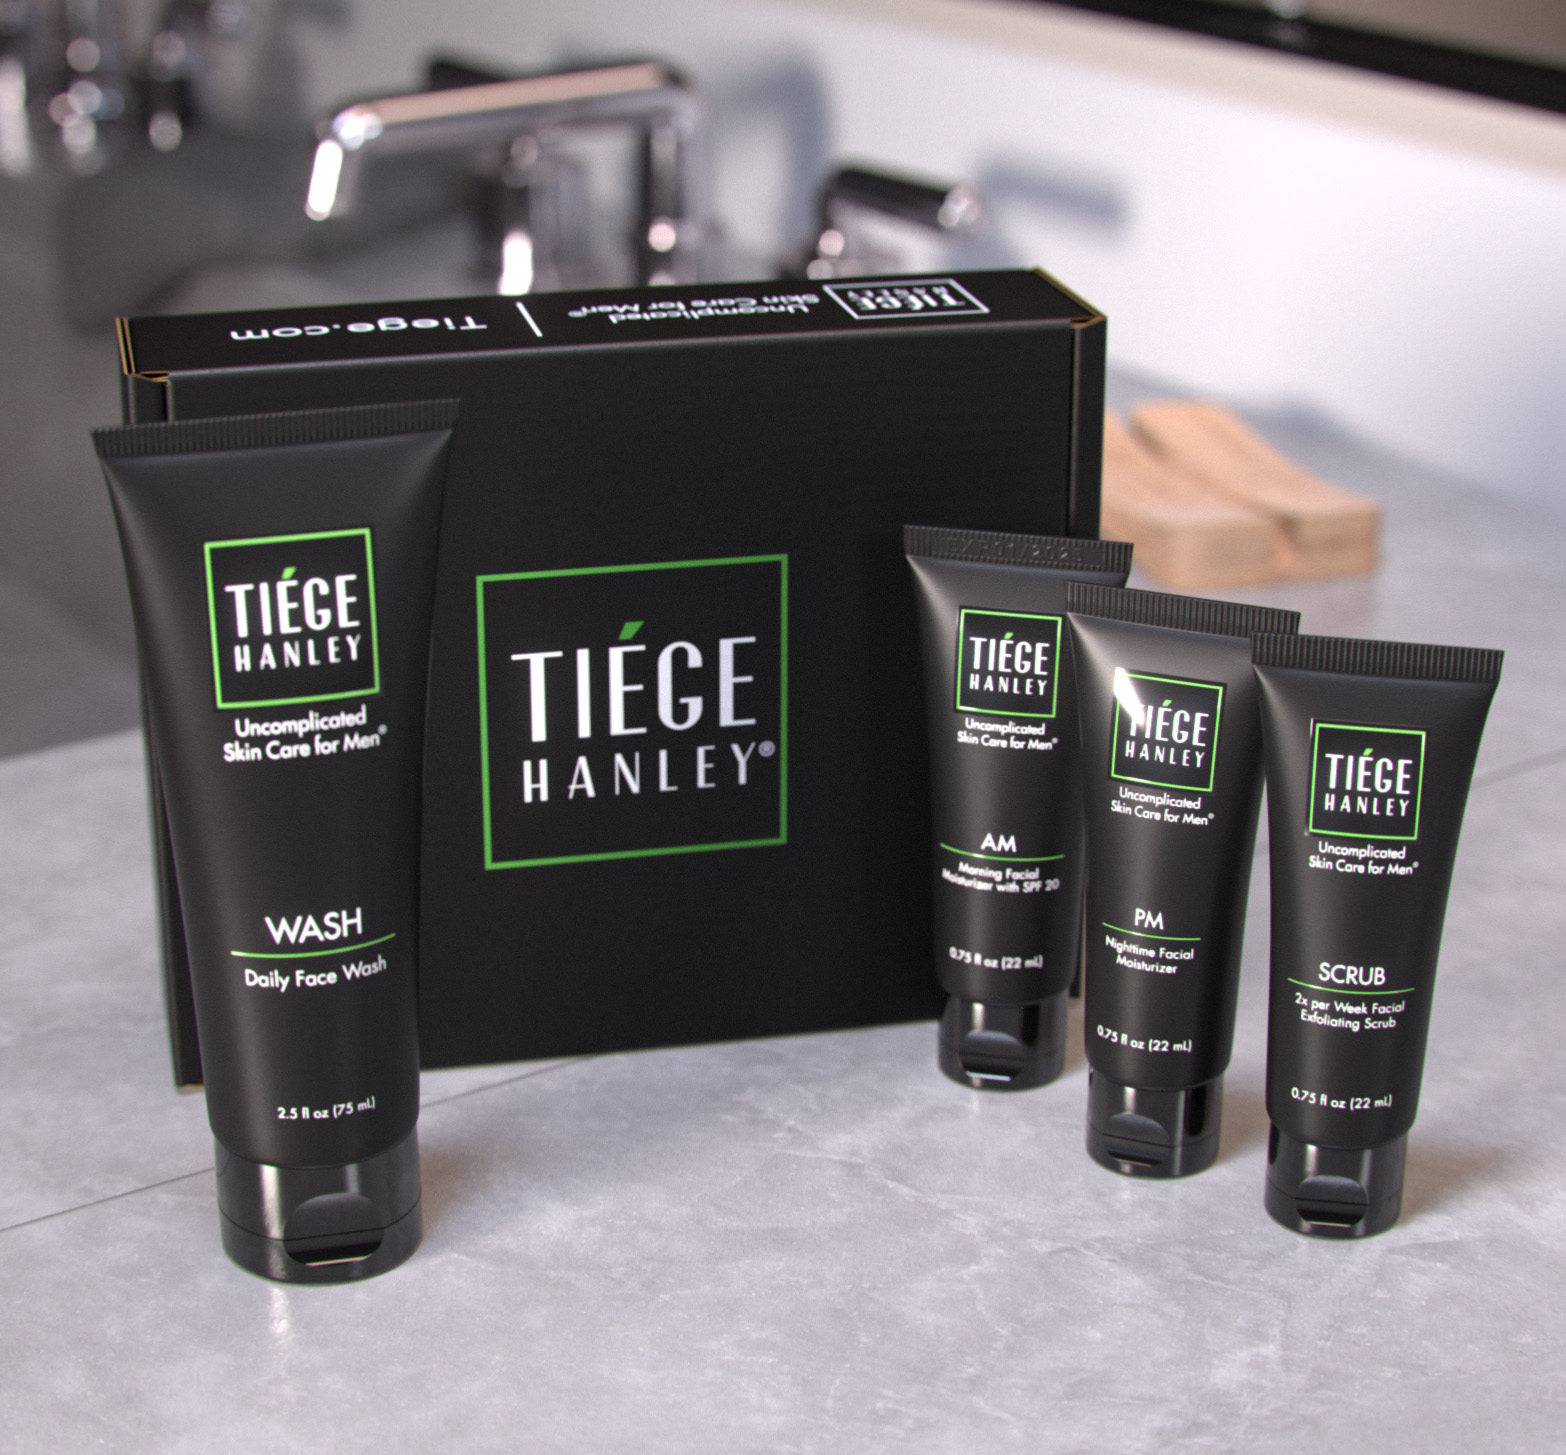 Why I am gifting Tiege Hanley over the other men’s skin care brands